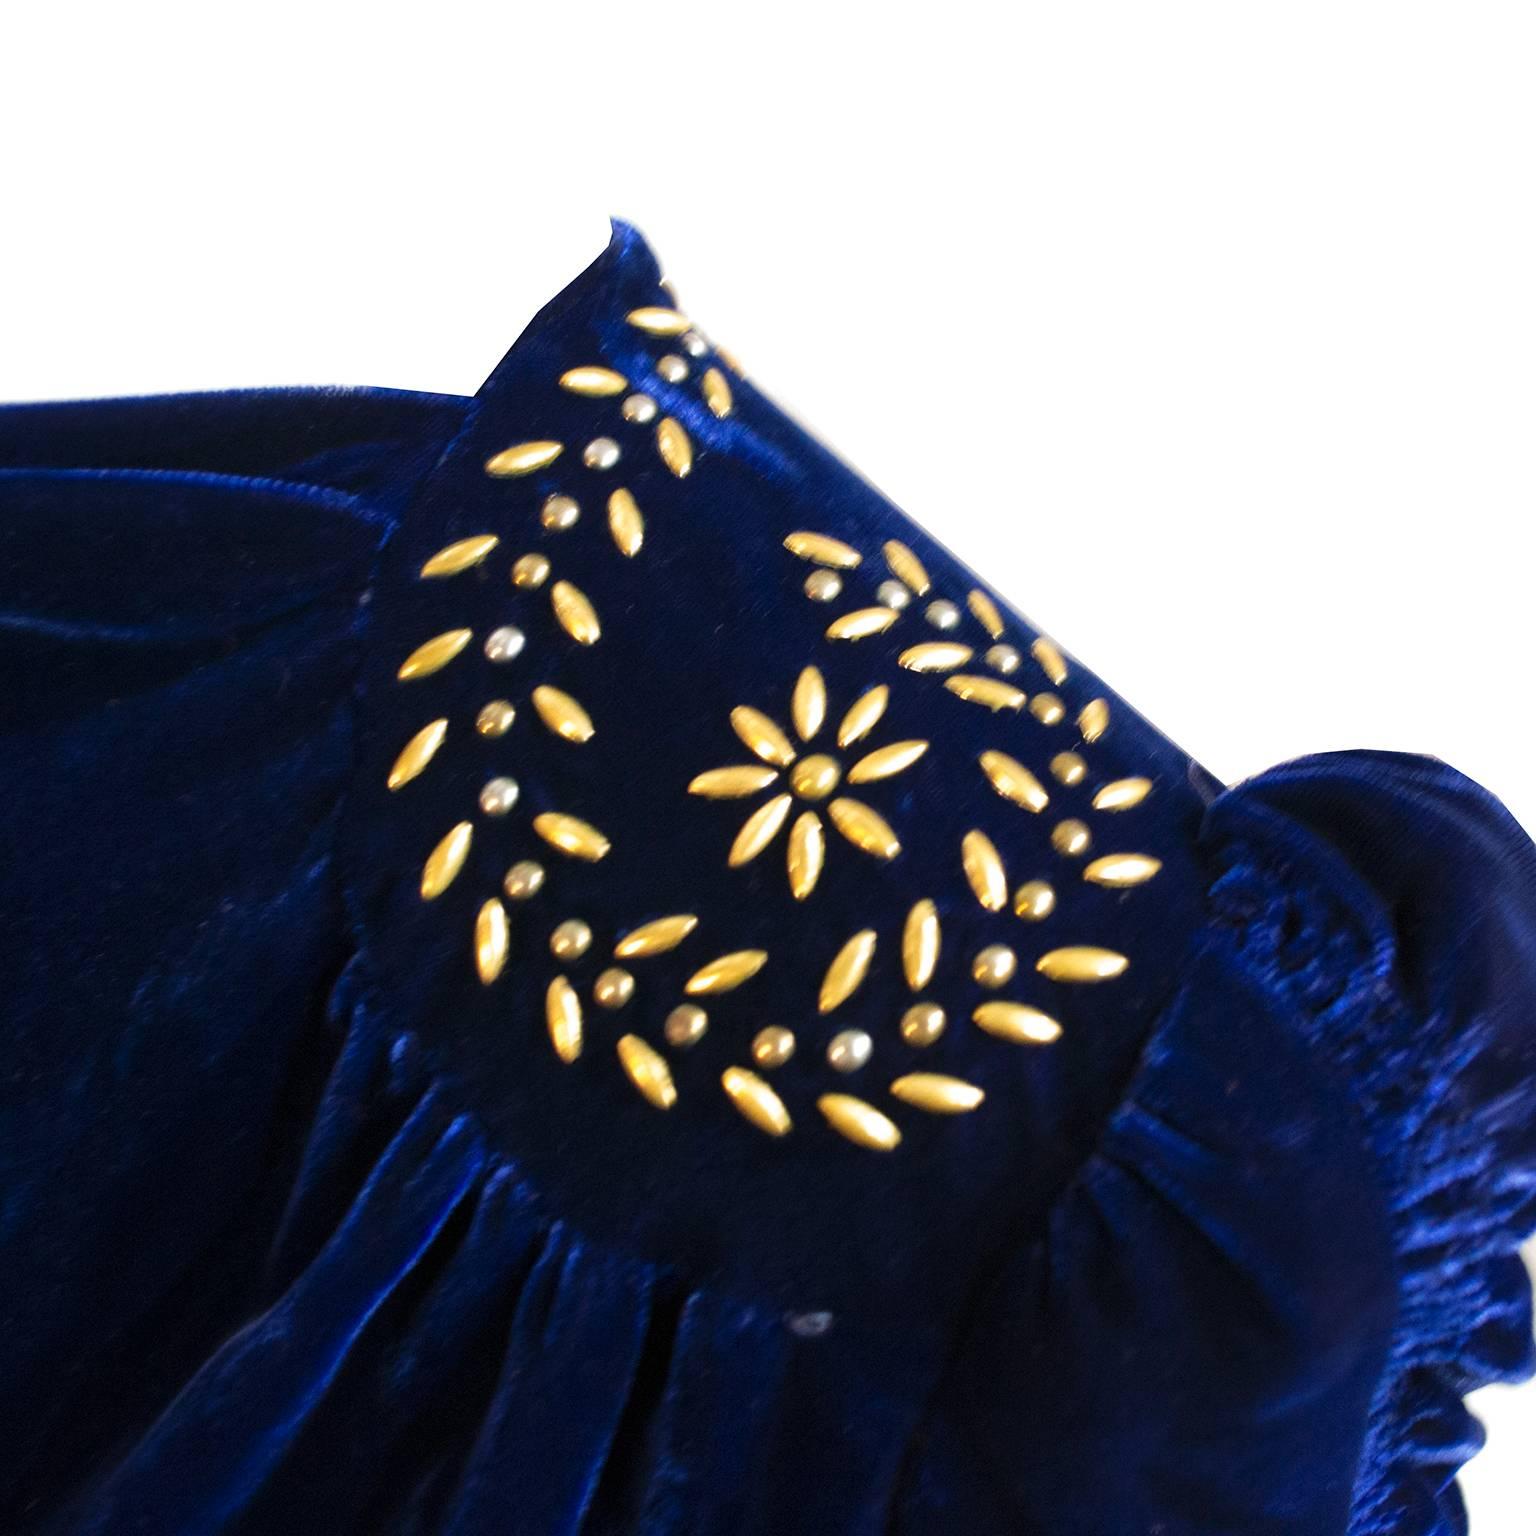 This late 1930's vintage dress is made of a luxurious blue velvet and has decorative metal on the shoulders that look like flower petals or leaves. The ruching on the sleeves makes a beautiful statement and there is a side zipper and covered buttons